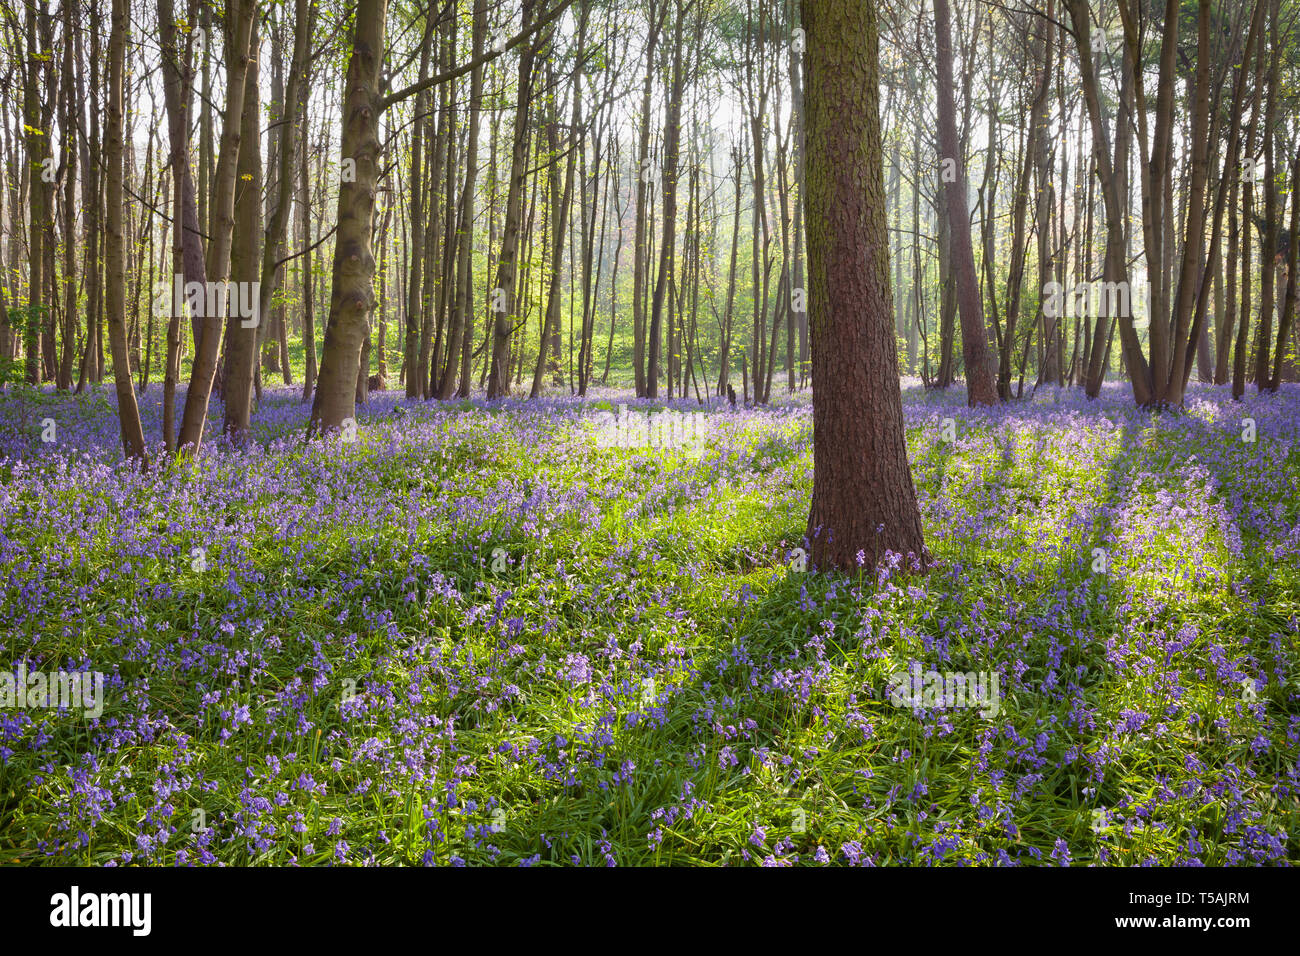 UK Weather: Early morning in an English bluebell woodland in Spring. Brumby Wood, Scunthorpe, North Lincolnshire, UK. 22nd April 2019. Stock Photo